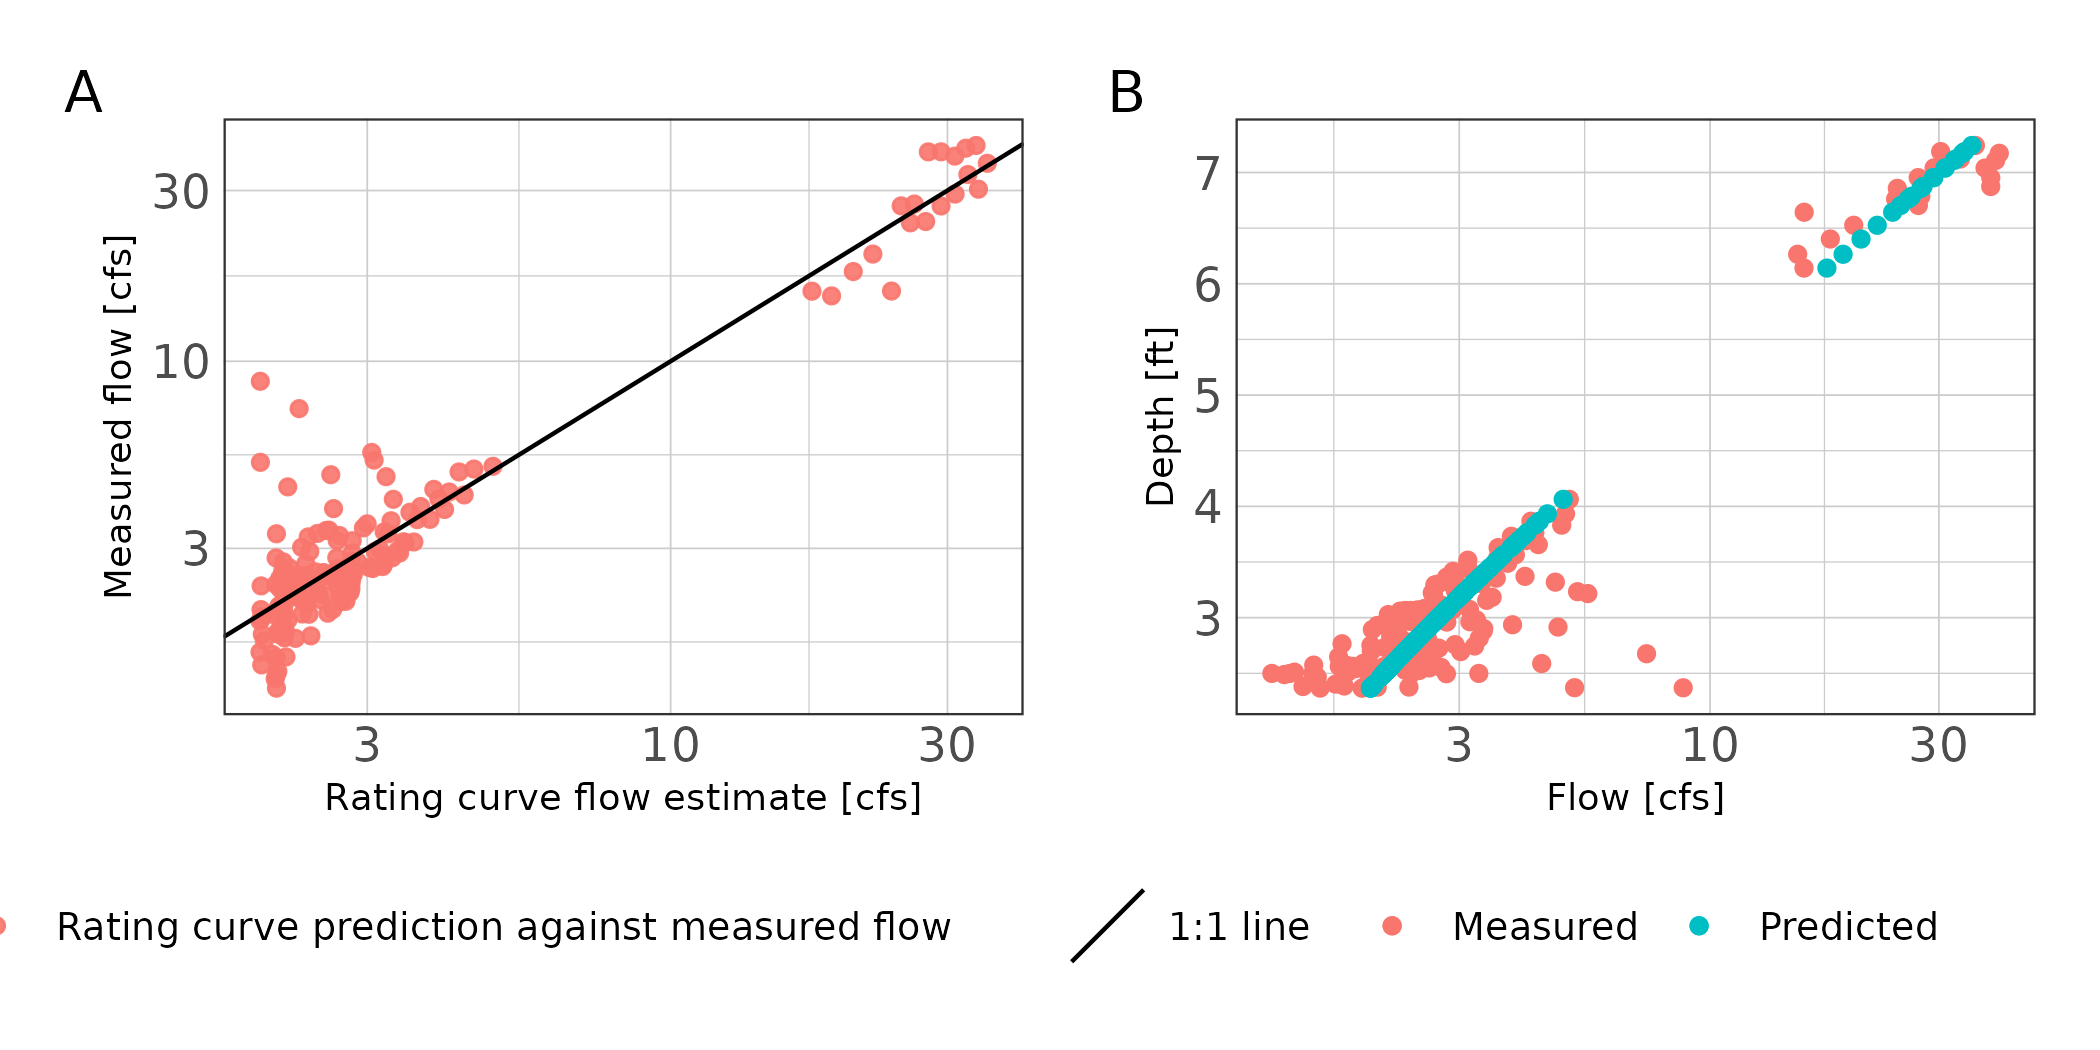 Scatter plot of rating curve estimated flows against measured flows (A) and stage discharge predictions (B) for station 16397.